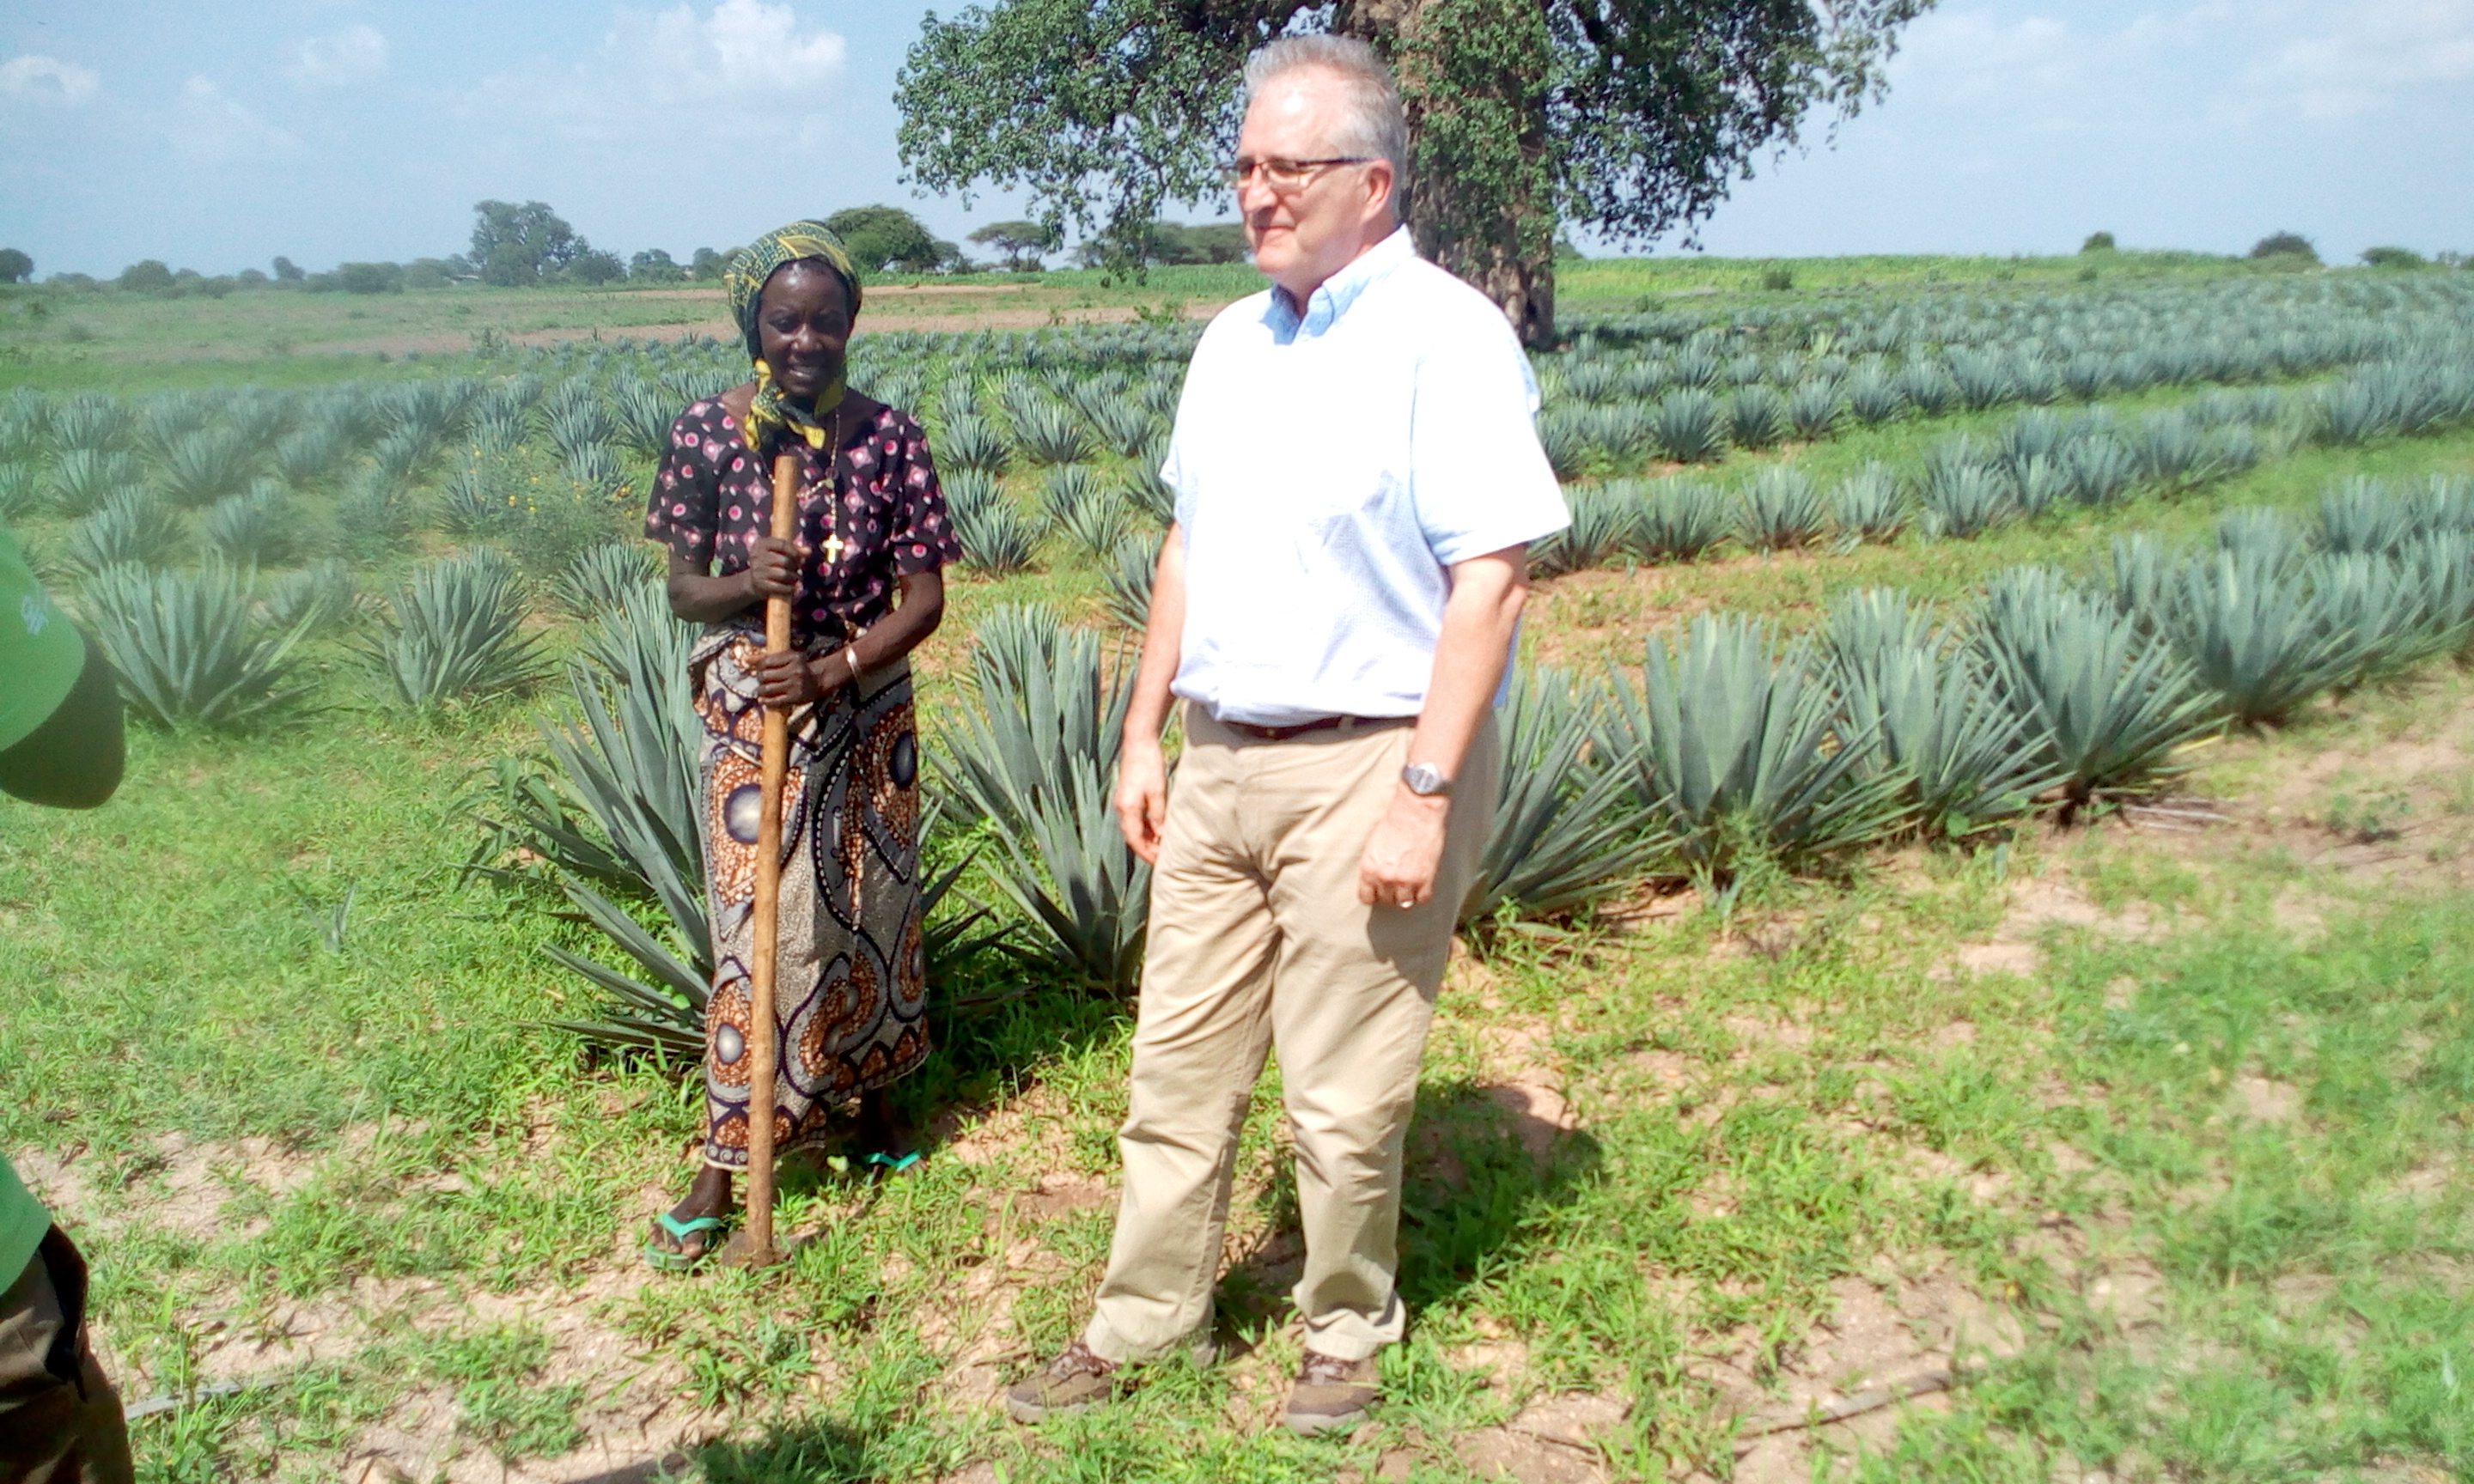 One of Sisal farmer members with OXFAM guest at her farm at Isoso Majengo village in Kishapu